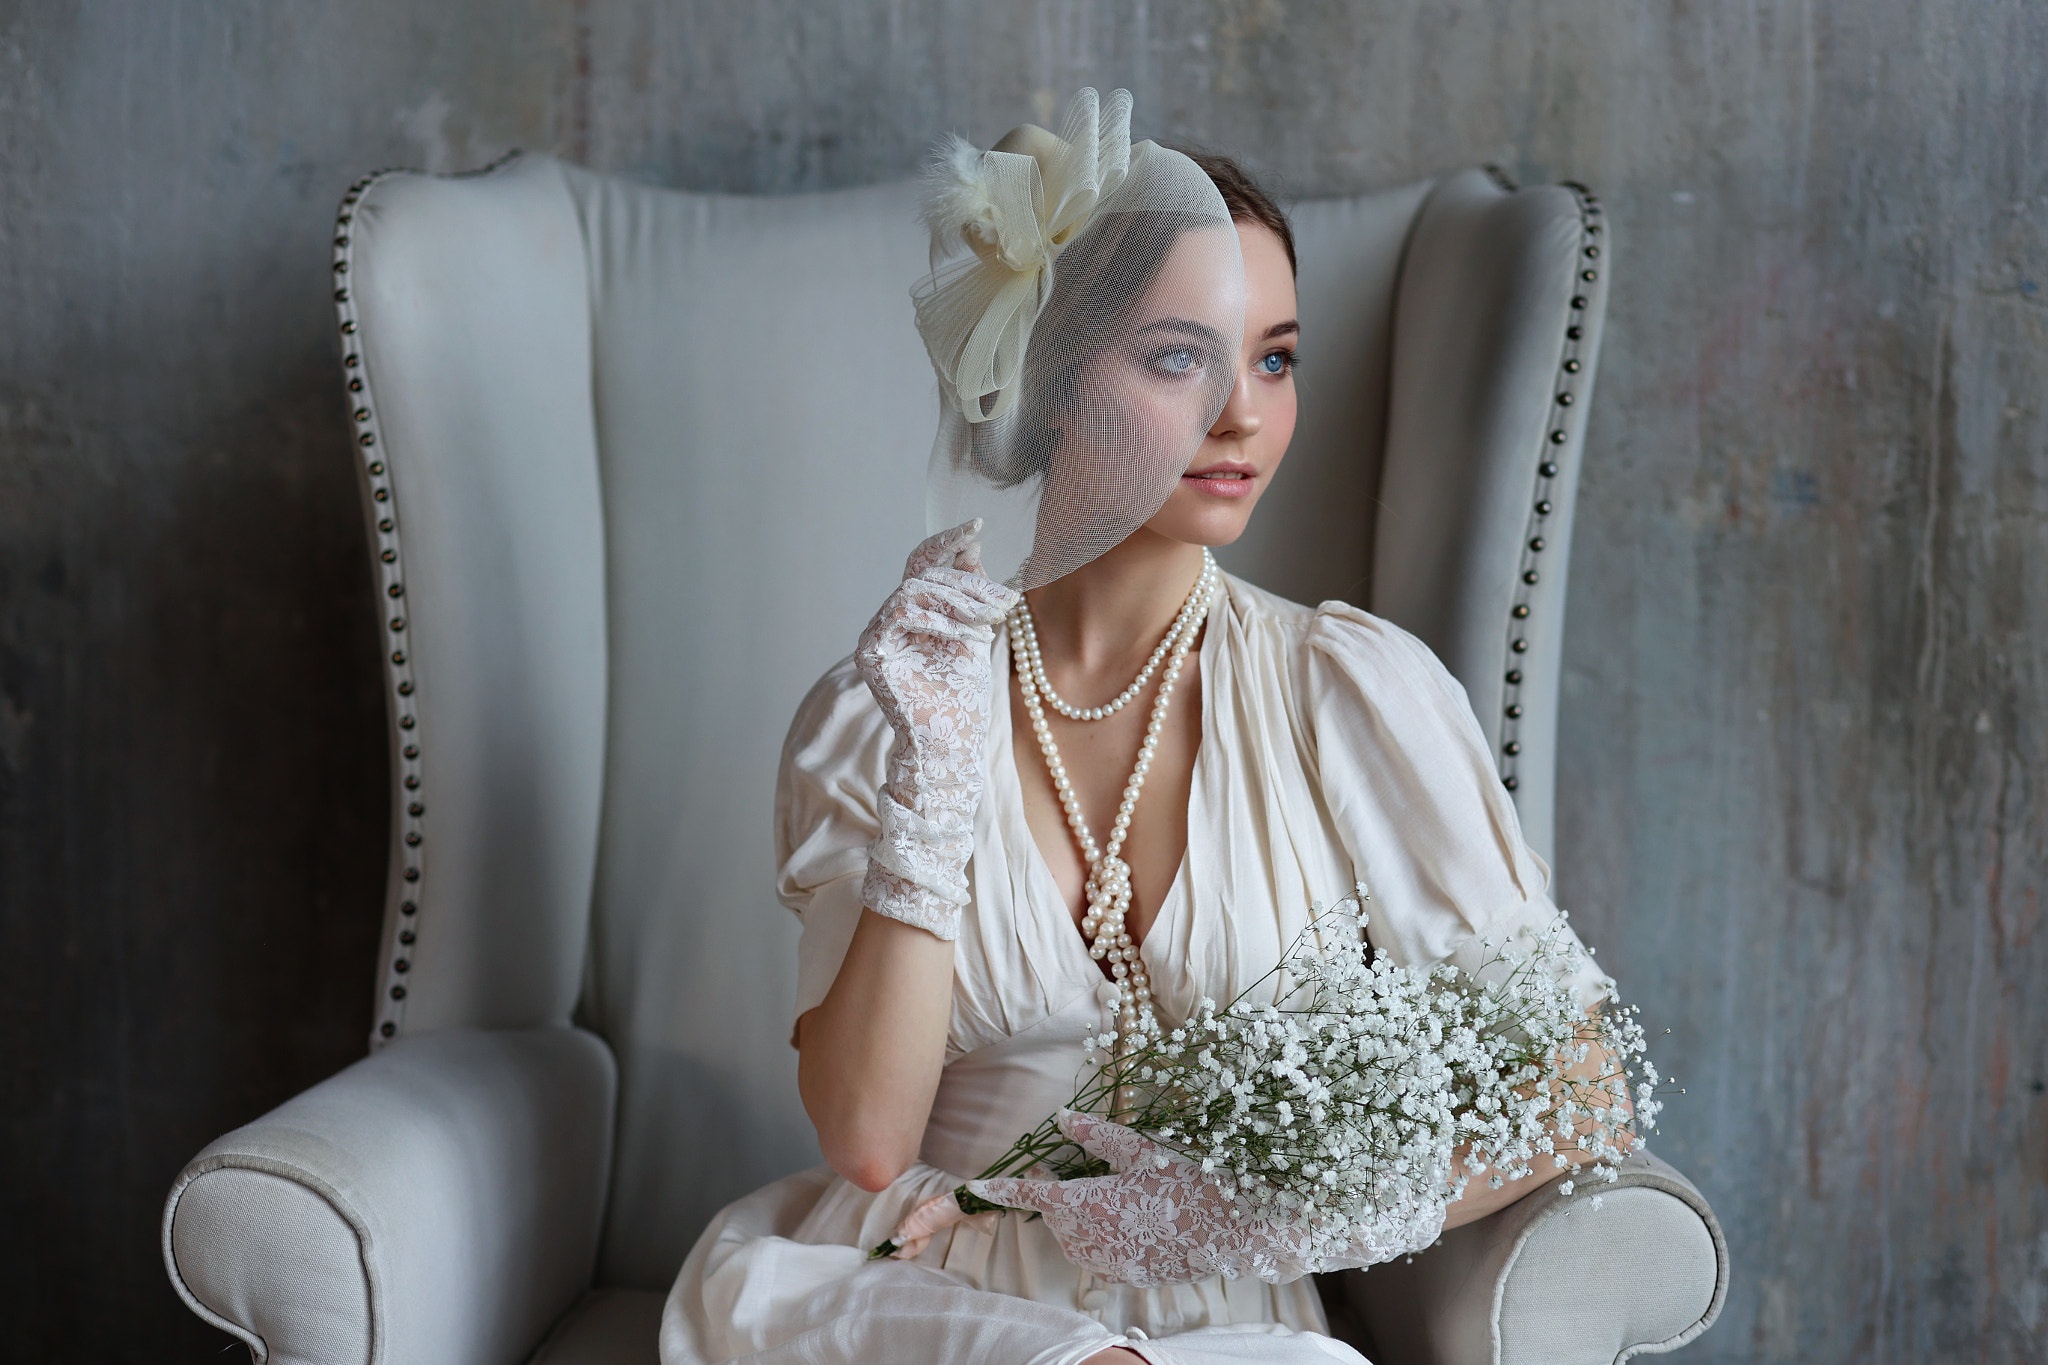 People 2048x1365 model red lipstick necklace white clothing blue eyes gloves sitting on chair women brunette veils pearl necklace lace gloves flowers white dress sitting chair women indoors